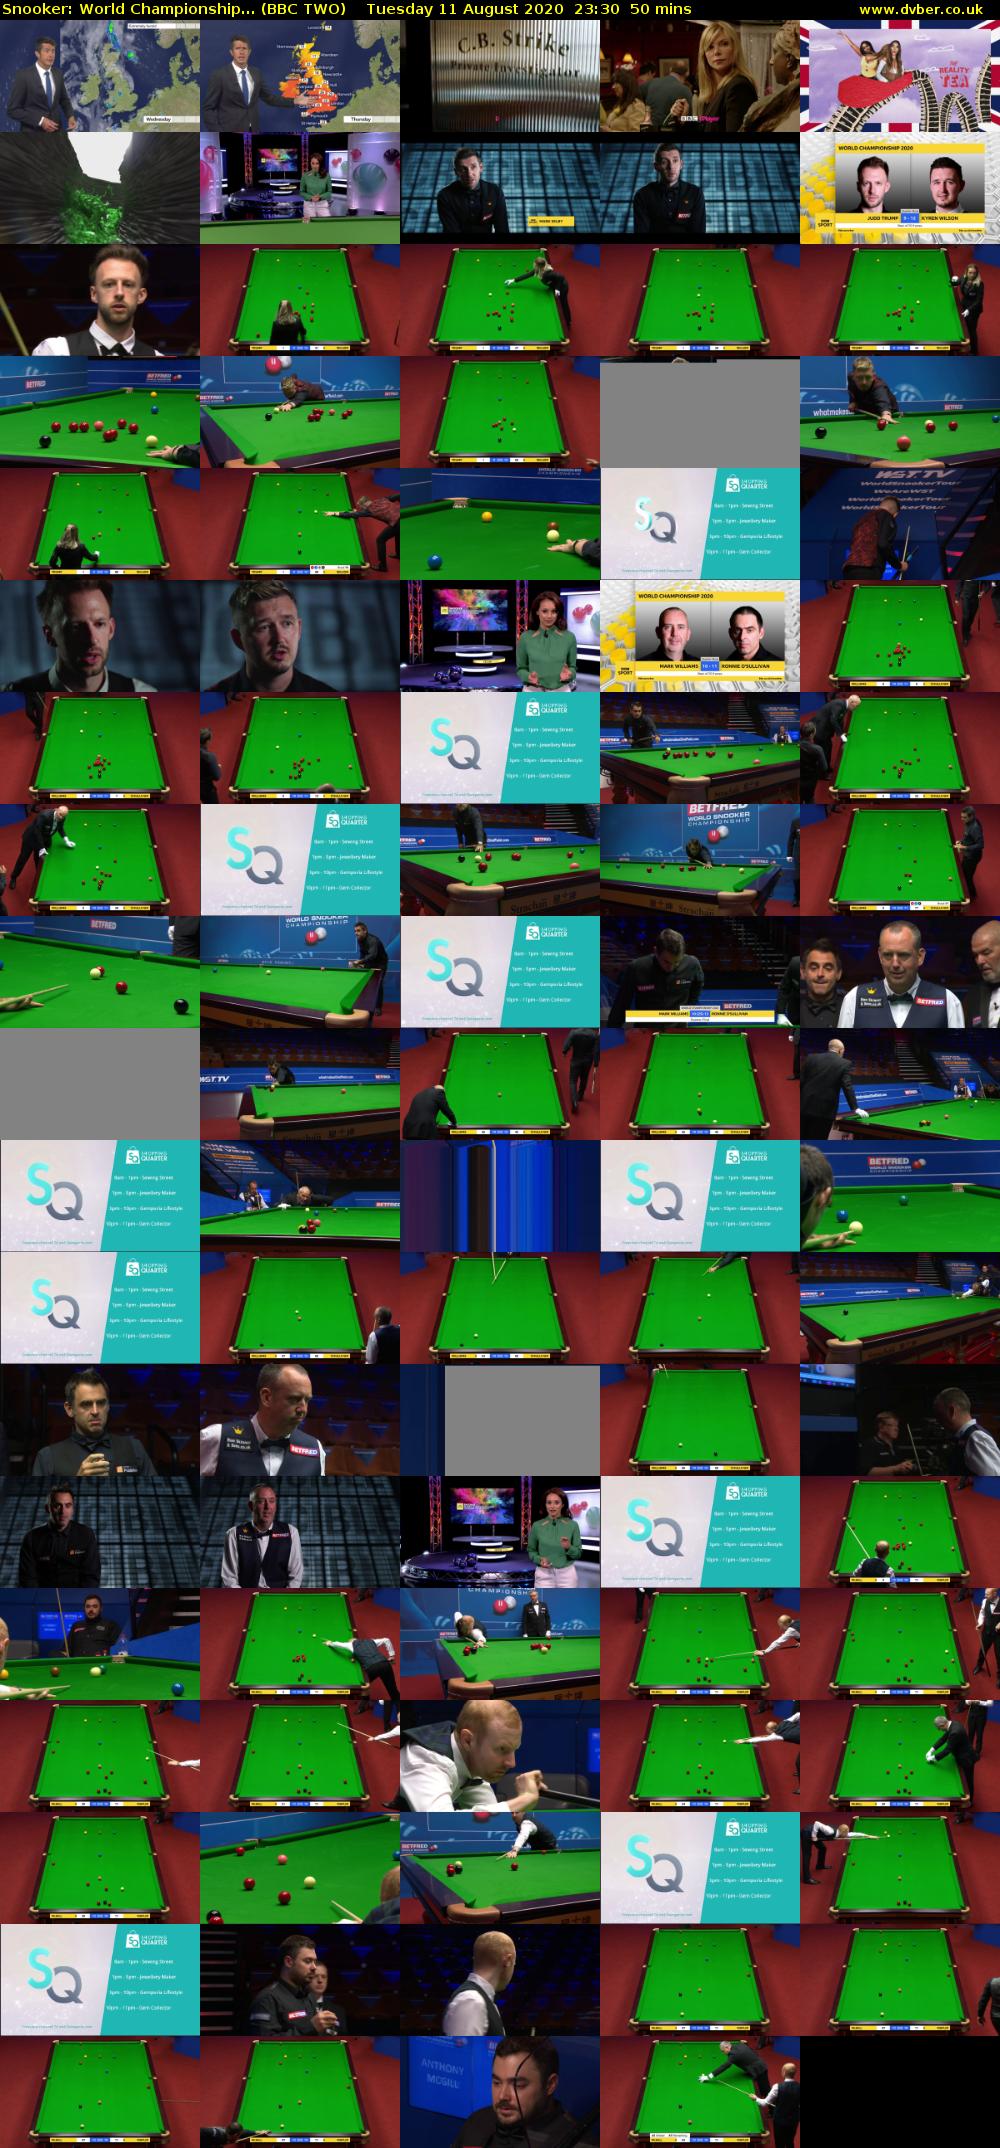 Snooker: World Championship... (BBC TWO) Tuesday 11 August 2020 23:30 - 00:20